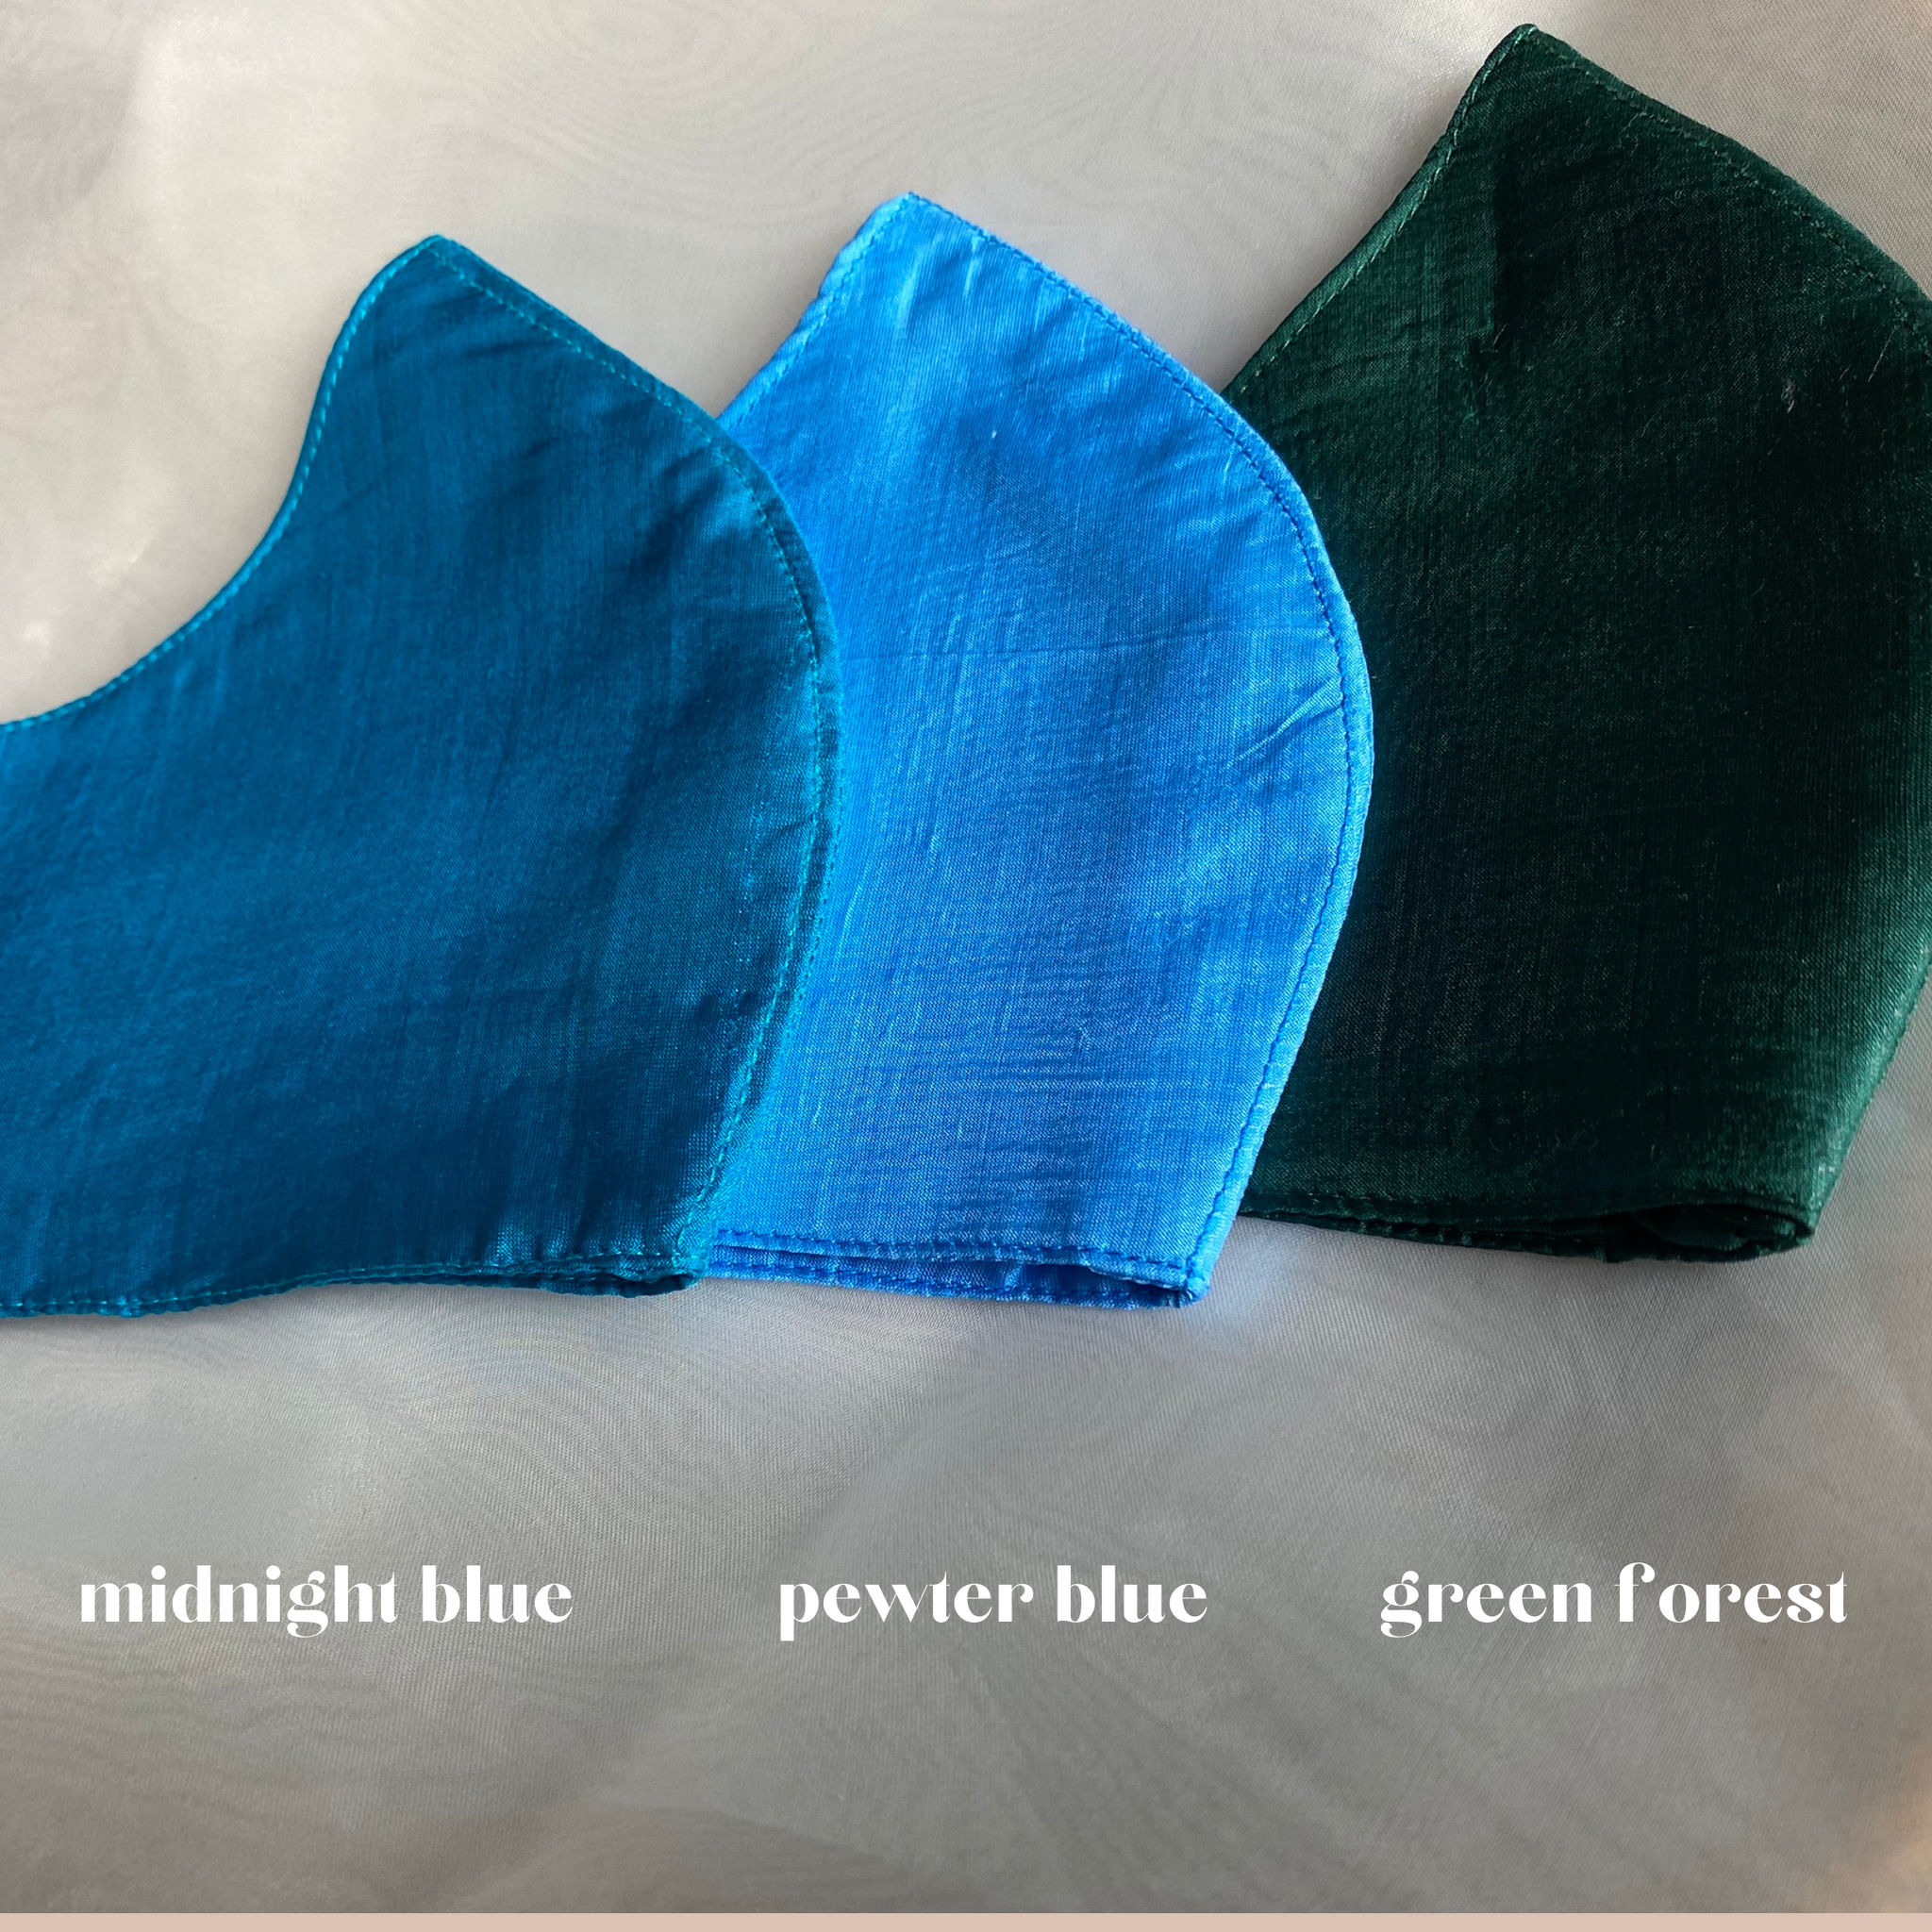 Hand-dyed Silk Face Masks|Reusable Face Coverings|3 layers|Adjustable